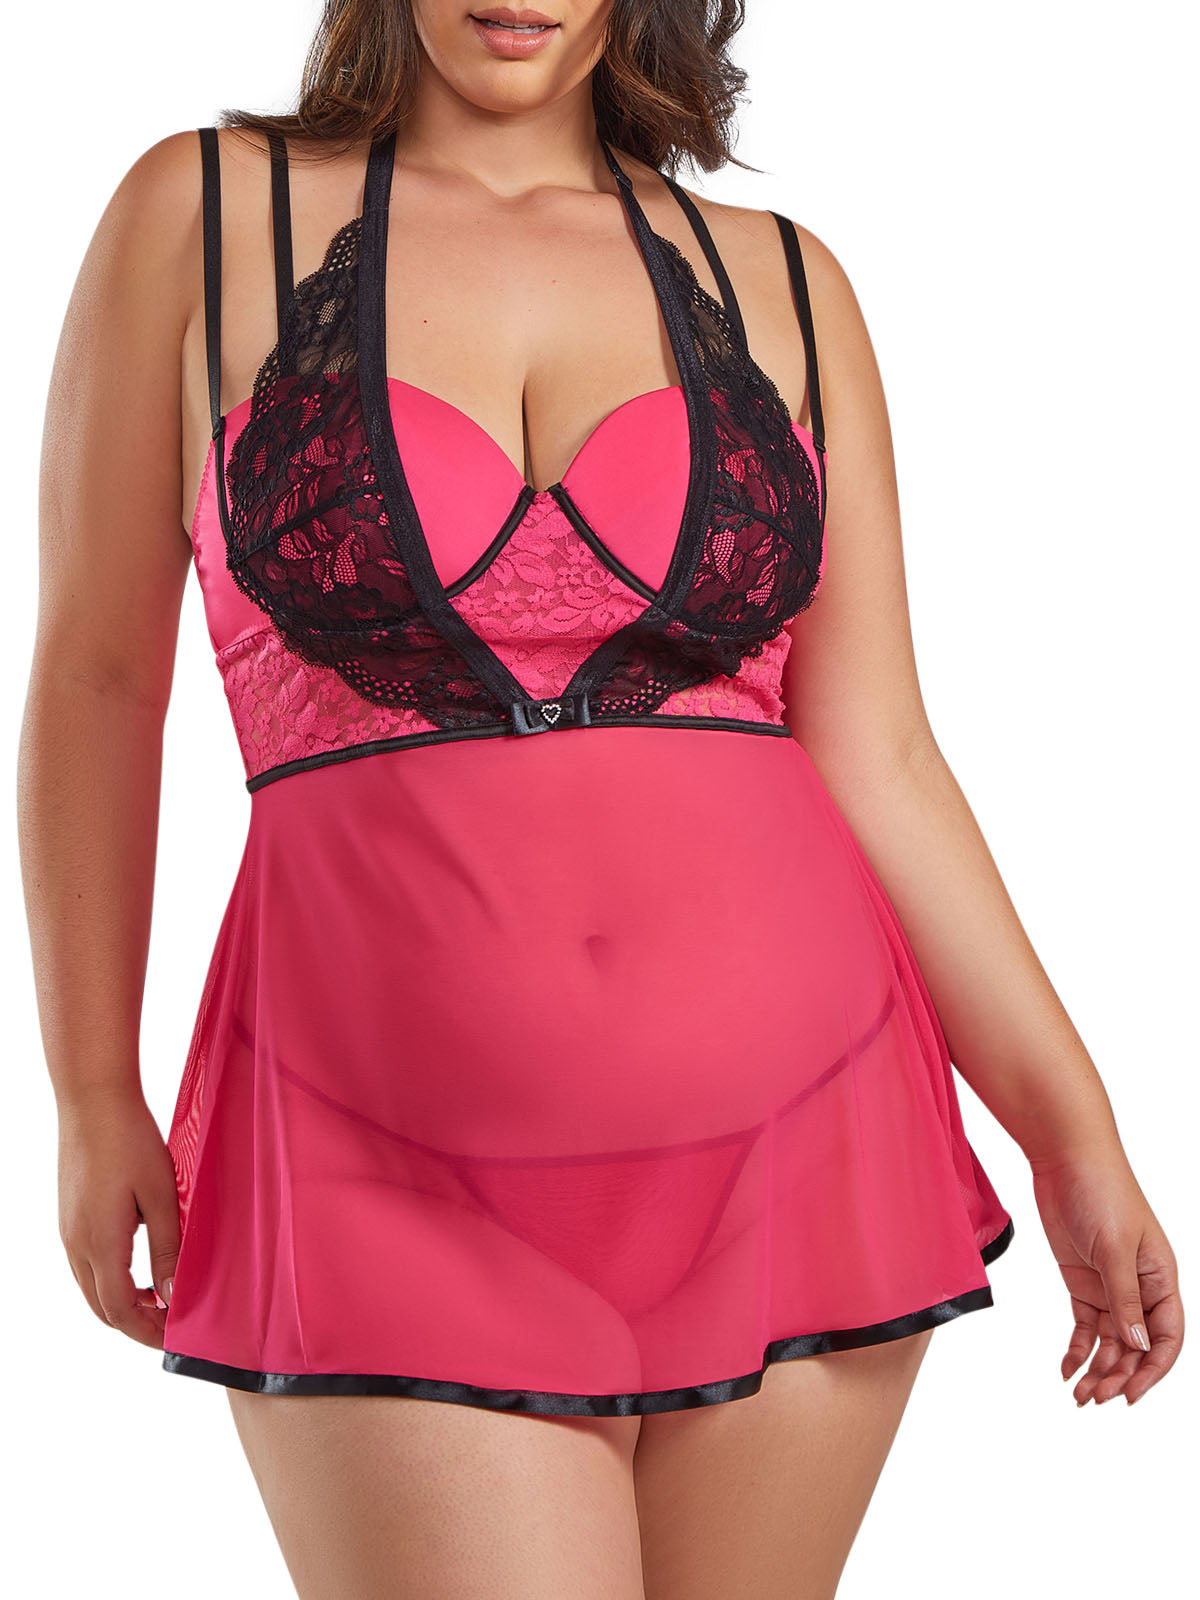 iCollection Plus Size Babydoll Madelyn Plus Size Babydoll